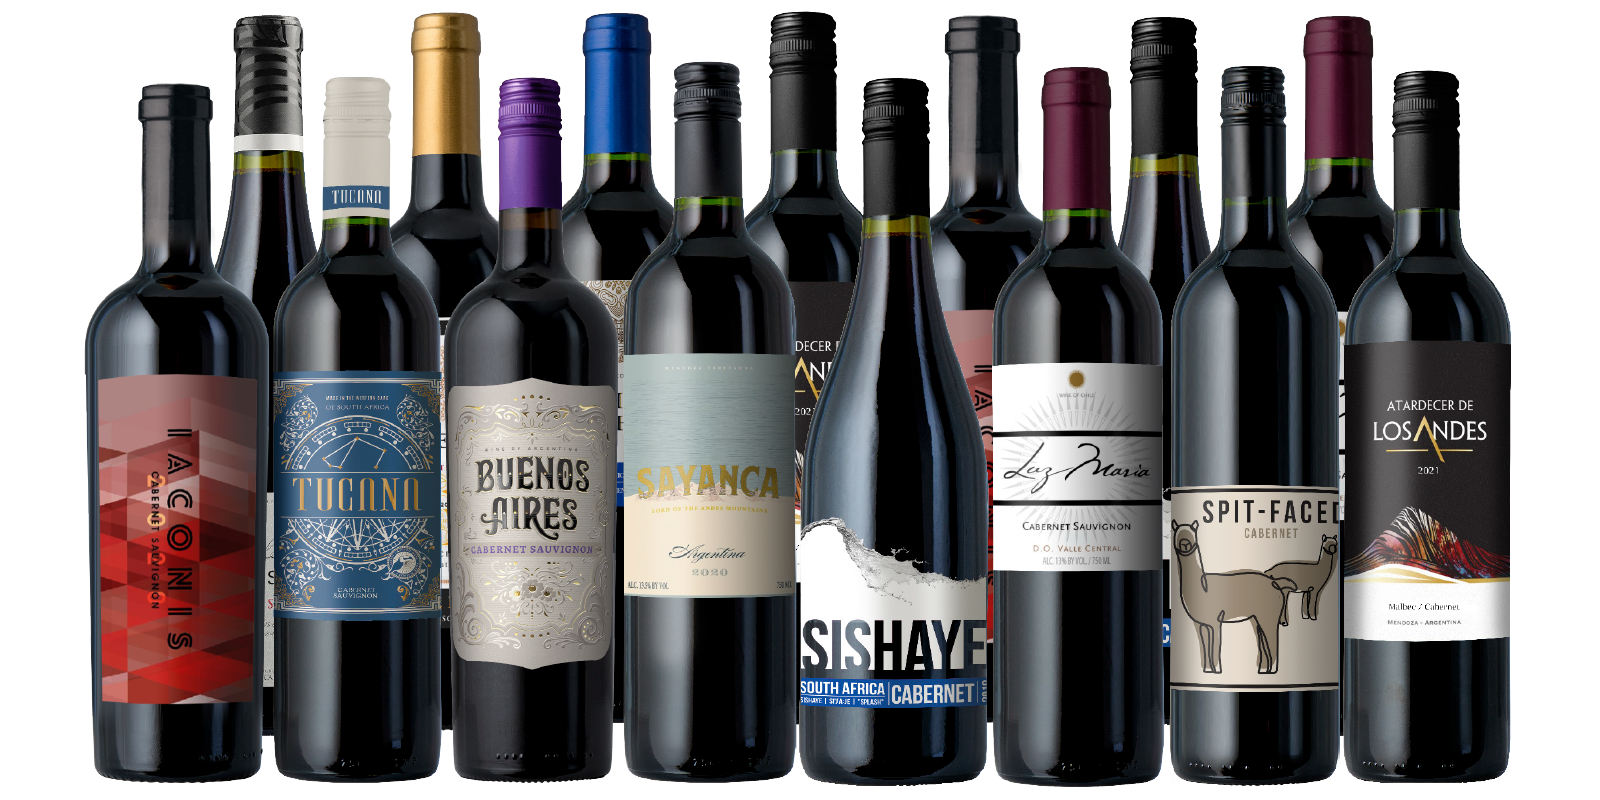 Craving Cabernets 15-Pack!*